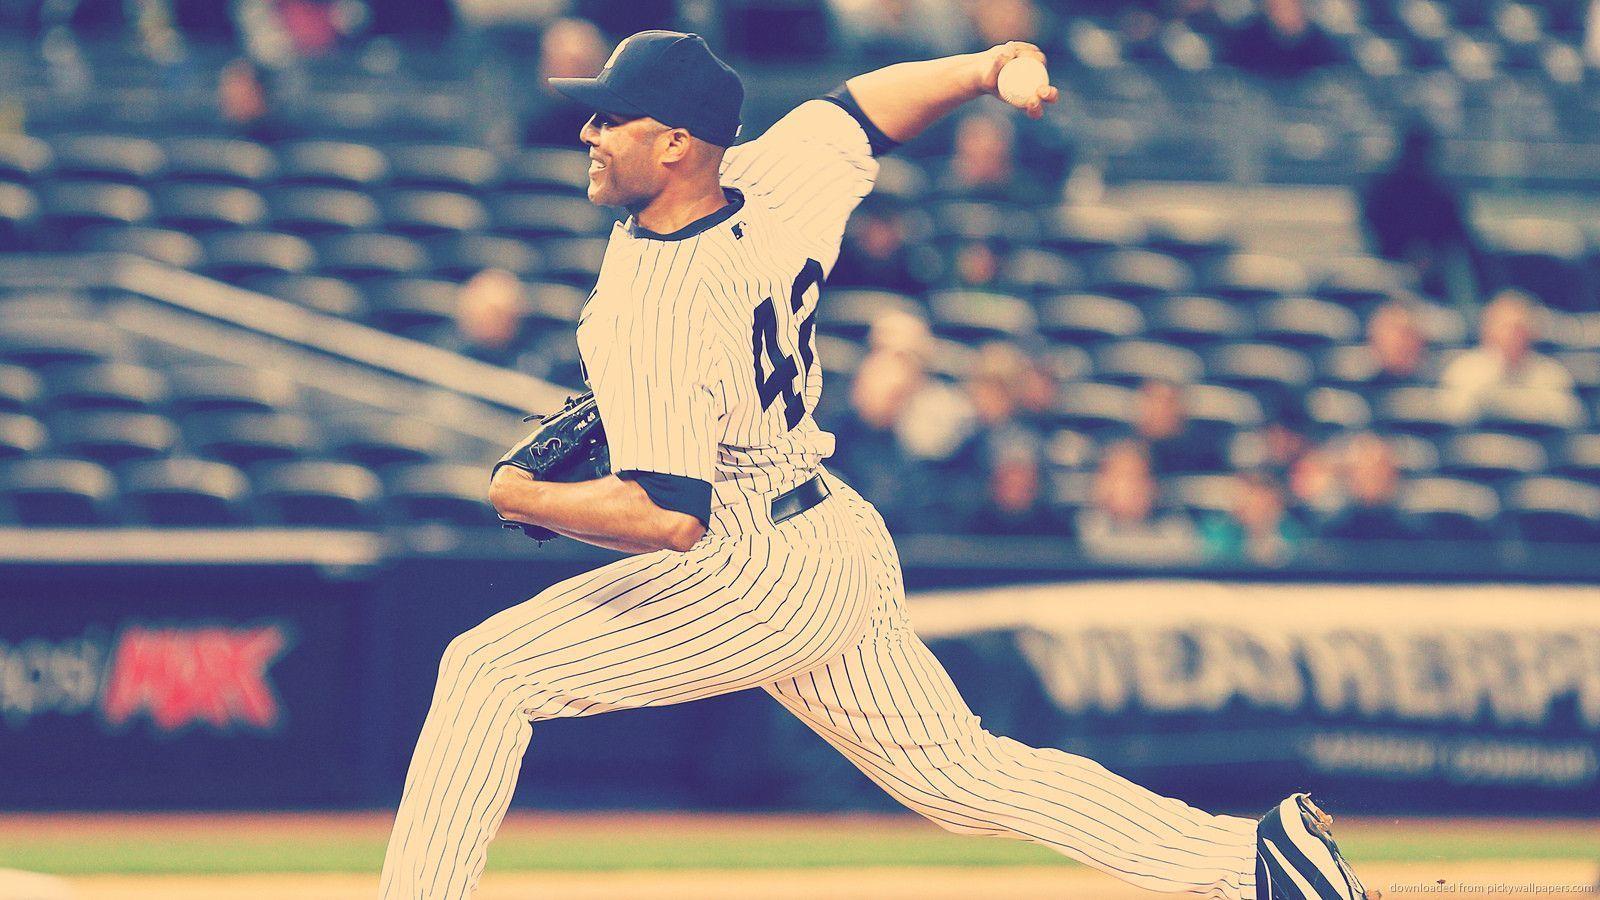 Download 1600x900 Mariano Rivera Pitching Stance Wallpaper